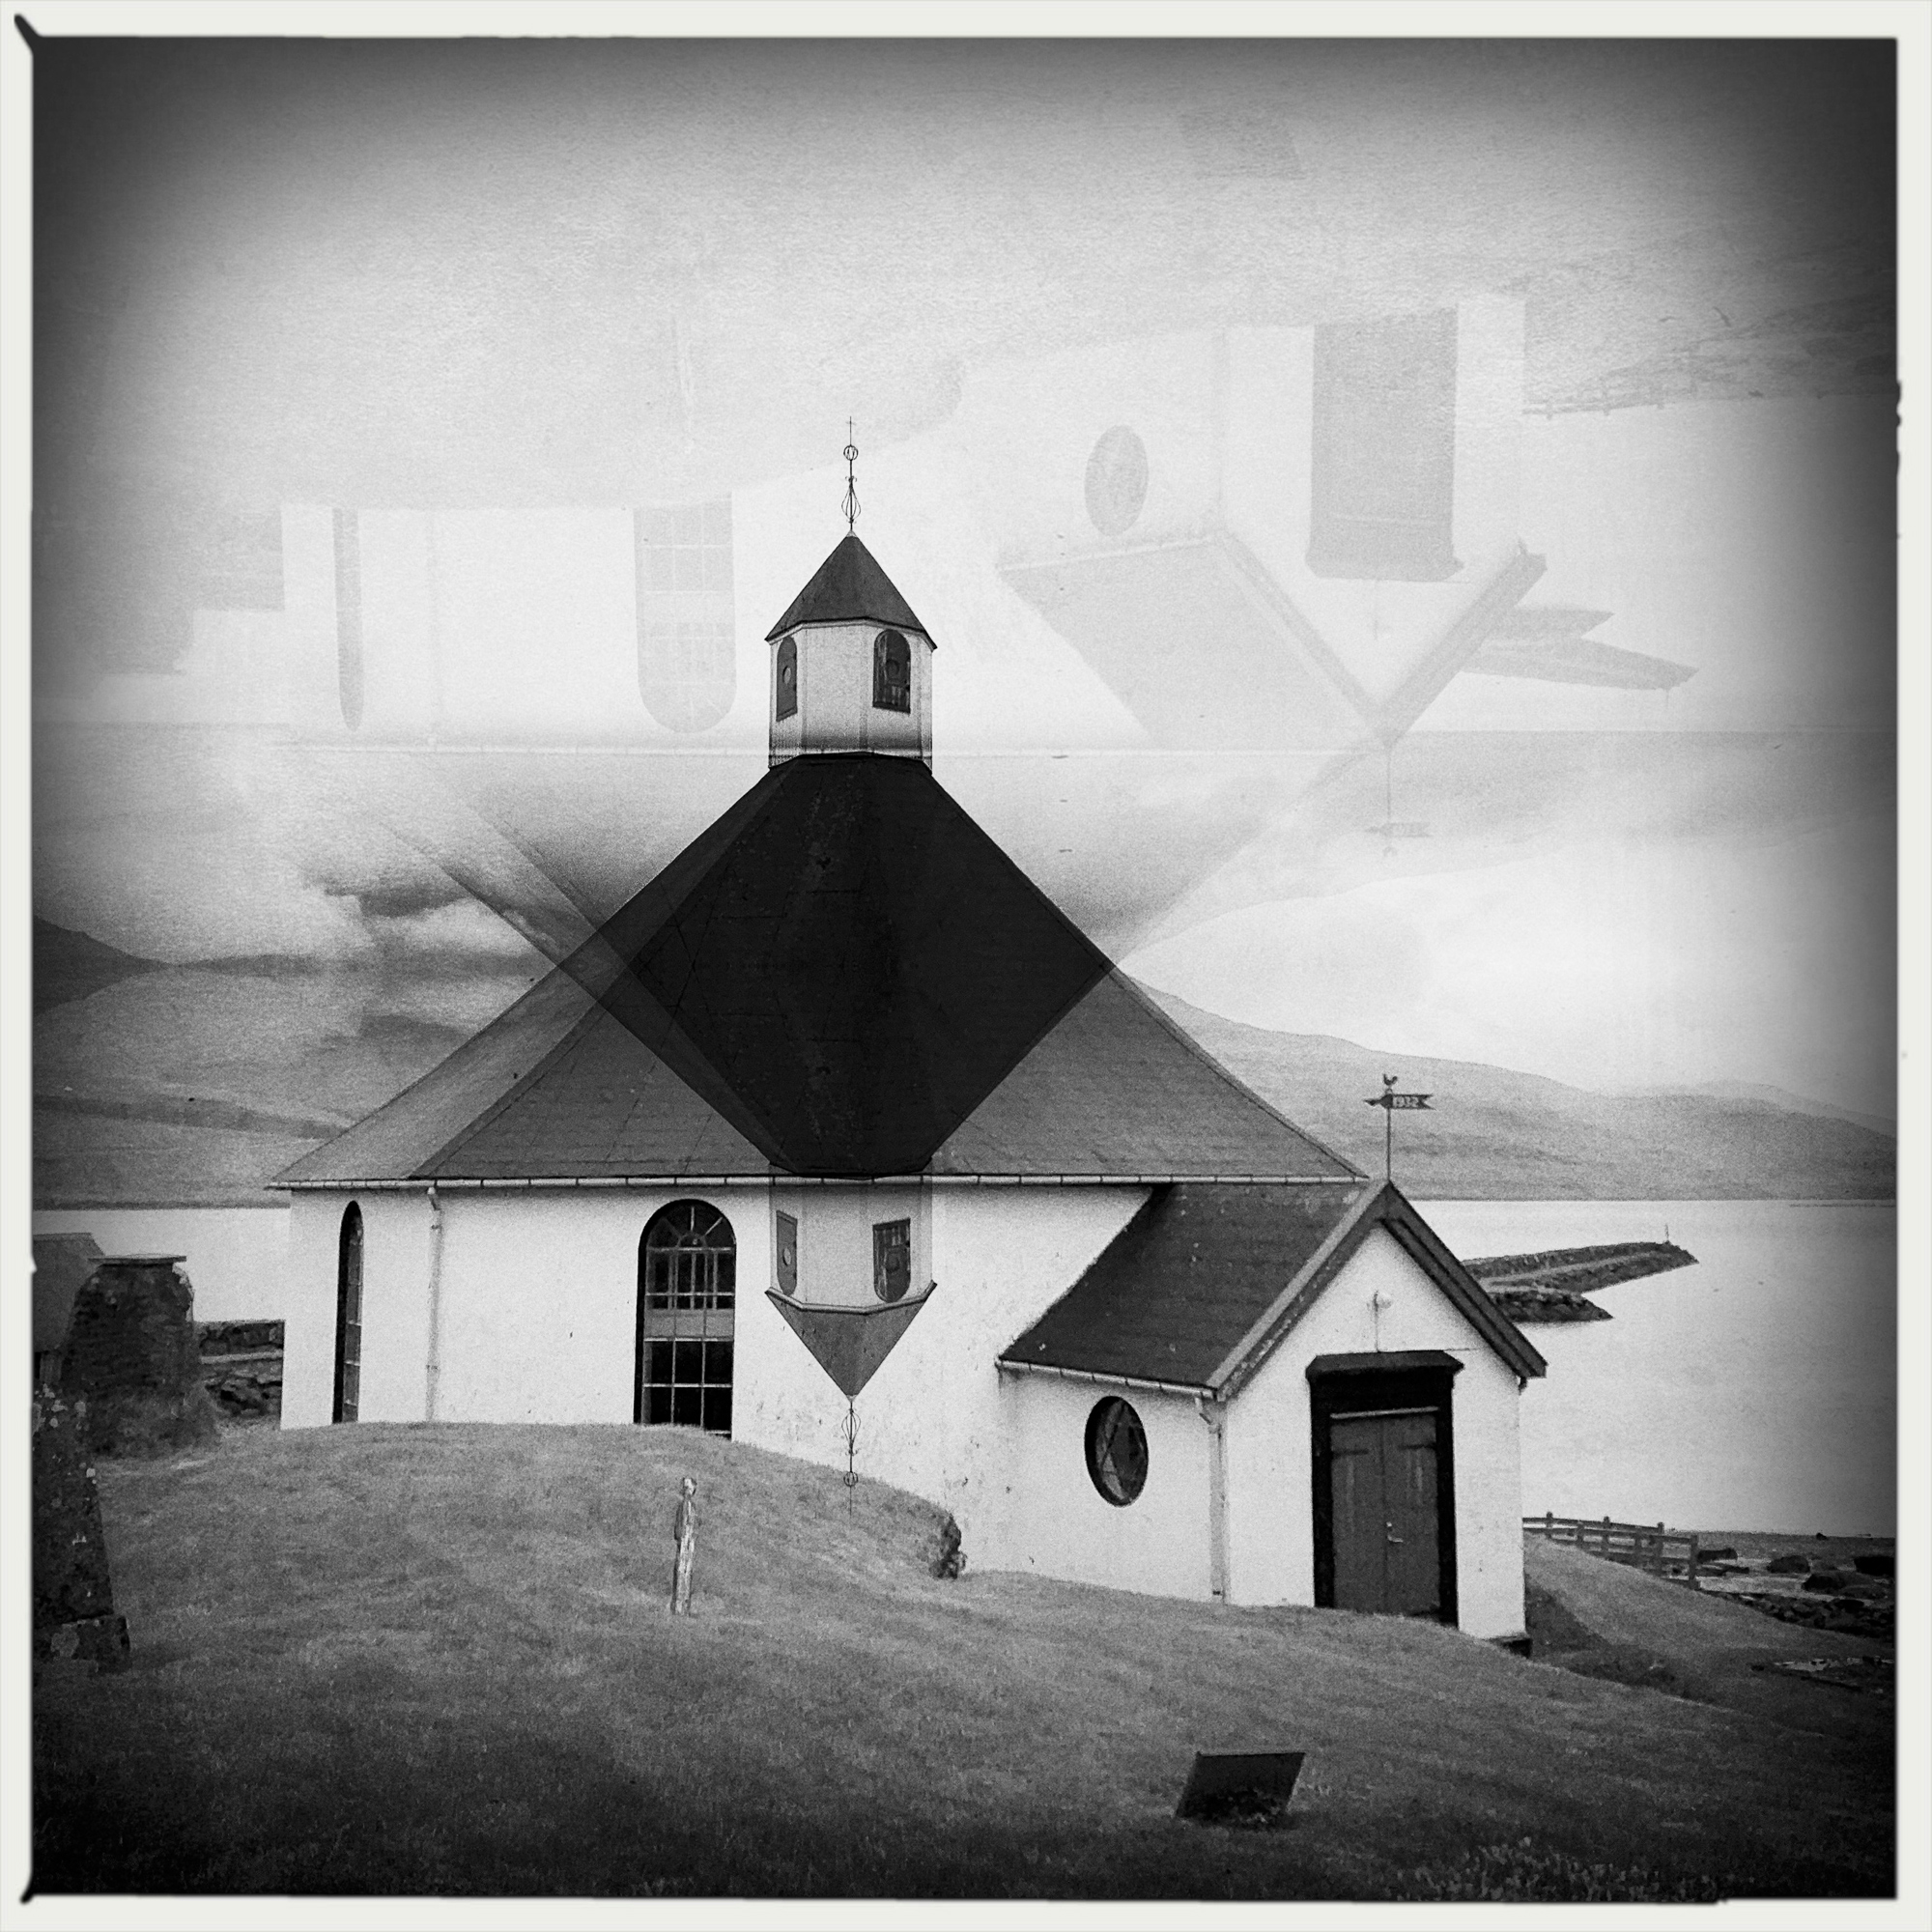 I also shoot many places with my iPhone. This I used the Hipstamatic app witha lens and film combo that does a double expsoure image. This is a years long project called Being Square - Seeing Double.